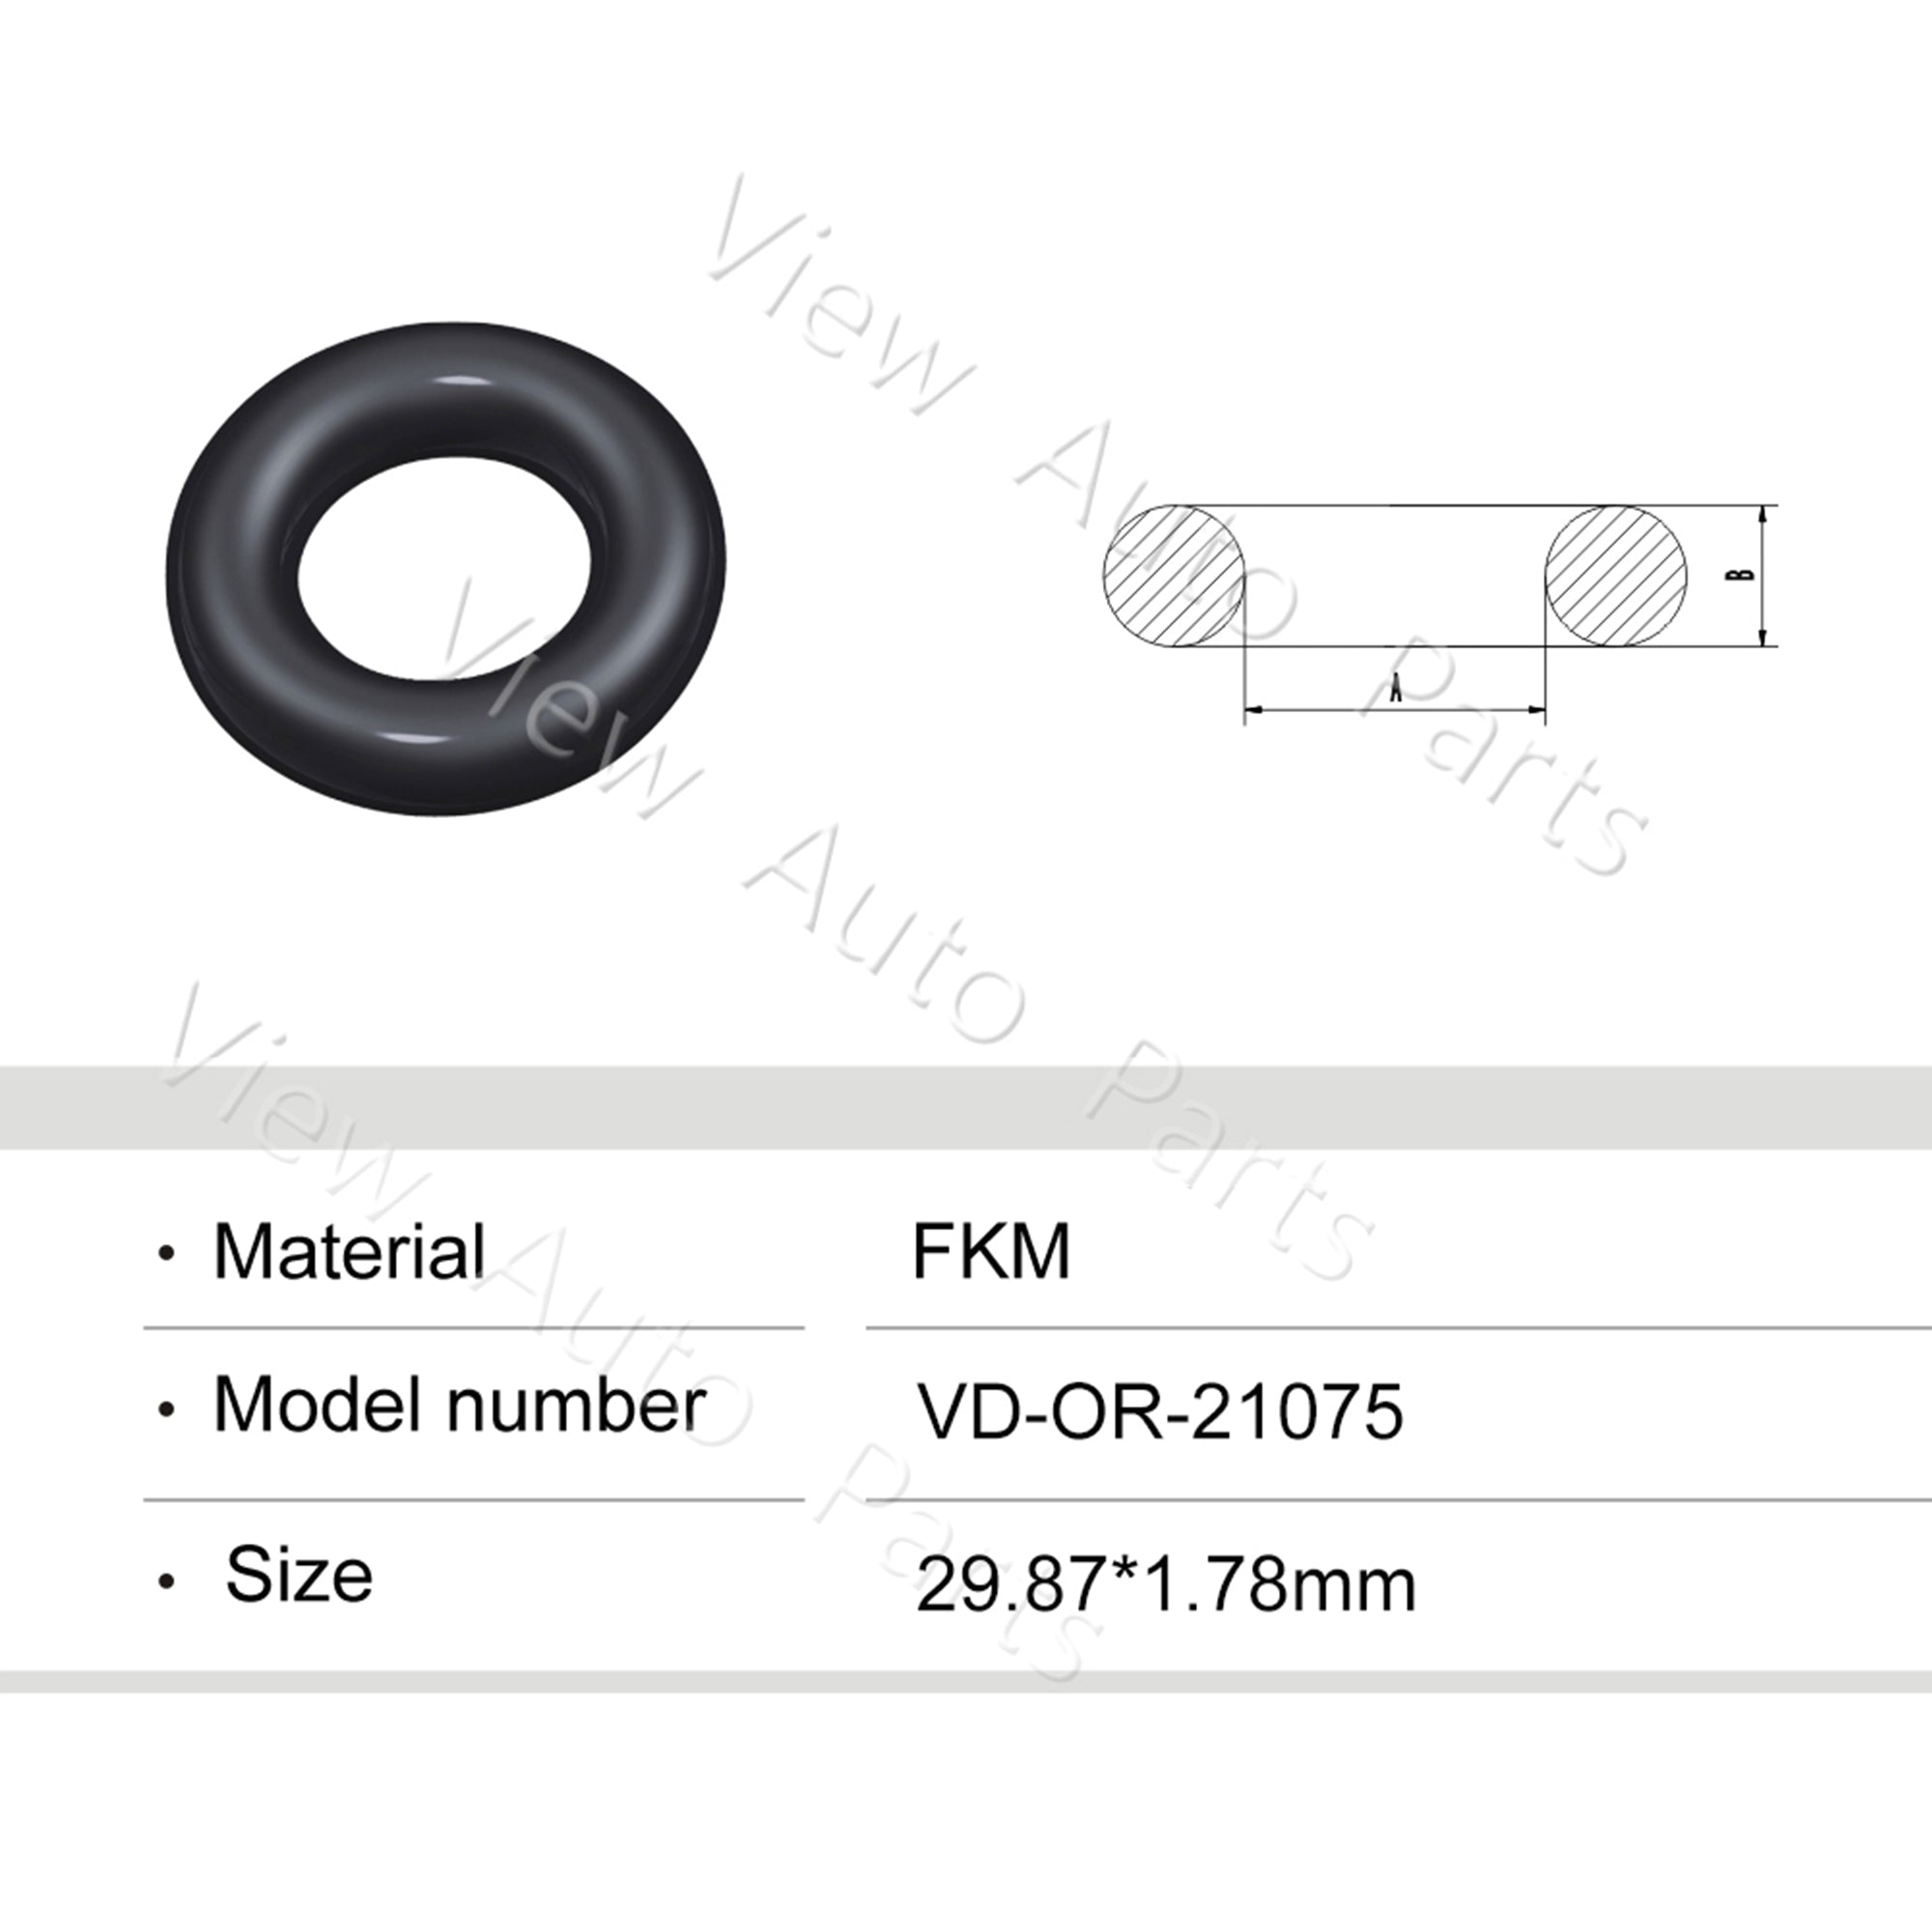 Fuel Injector Rubber Seal Orings for Fuel Injector Repair Kits FKM & Rubber Heat Resistant, Size: 29.87*1.78mm OR-21075